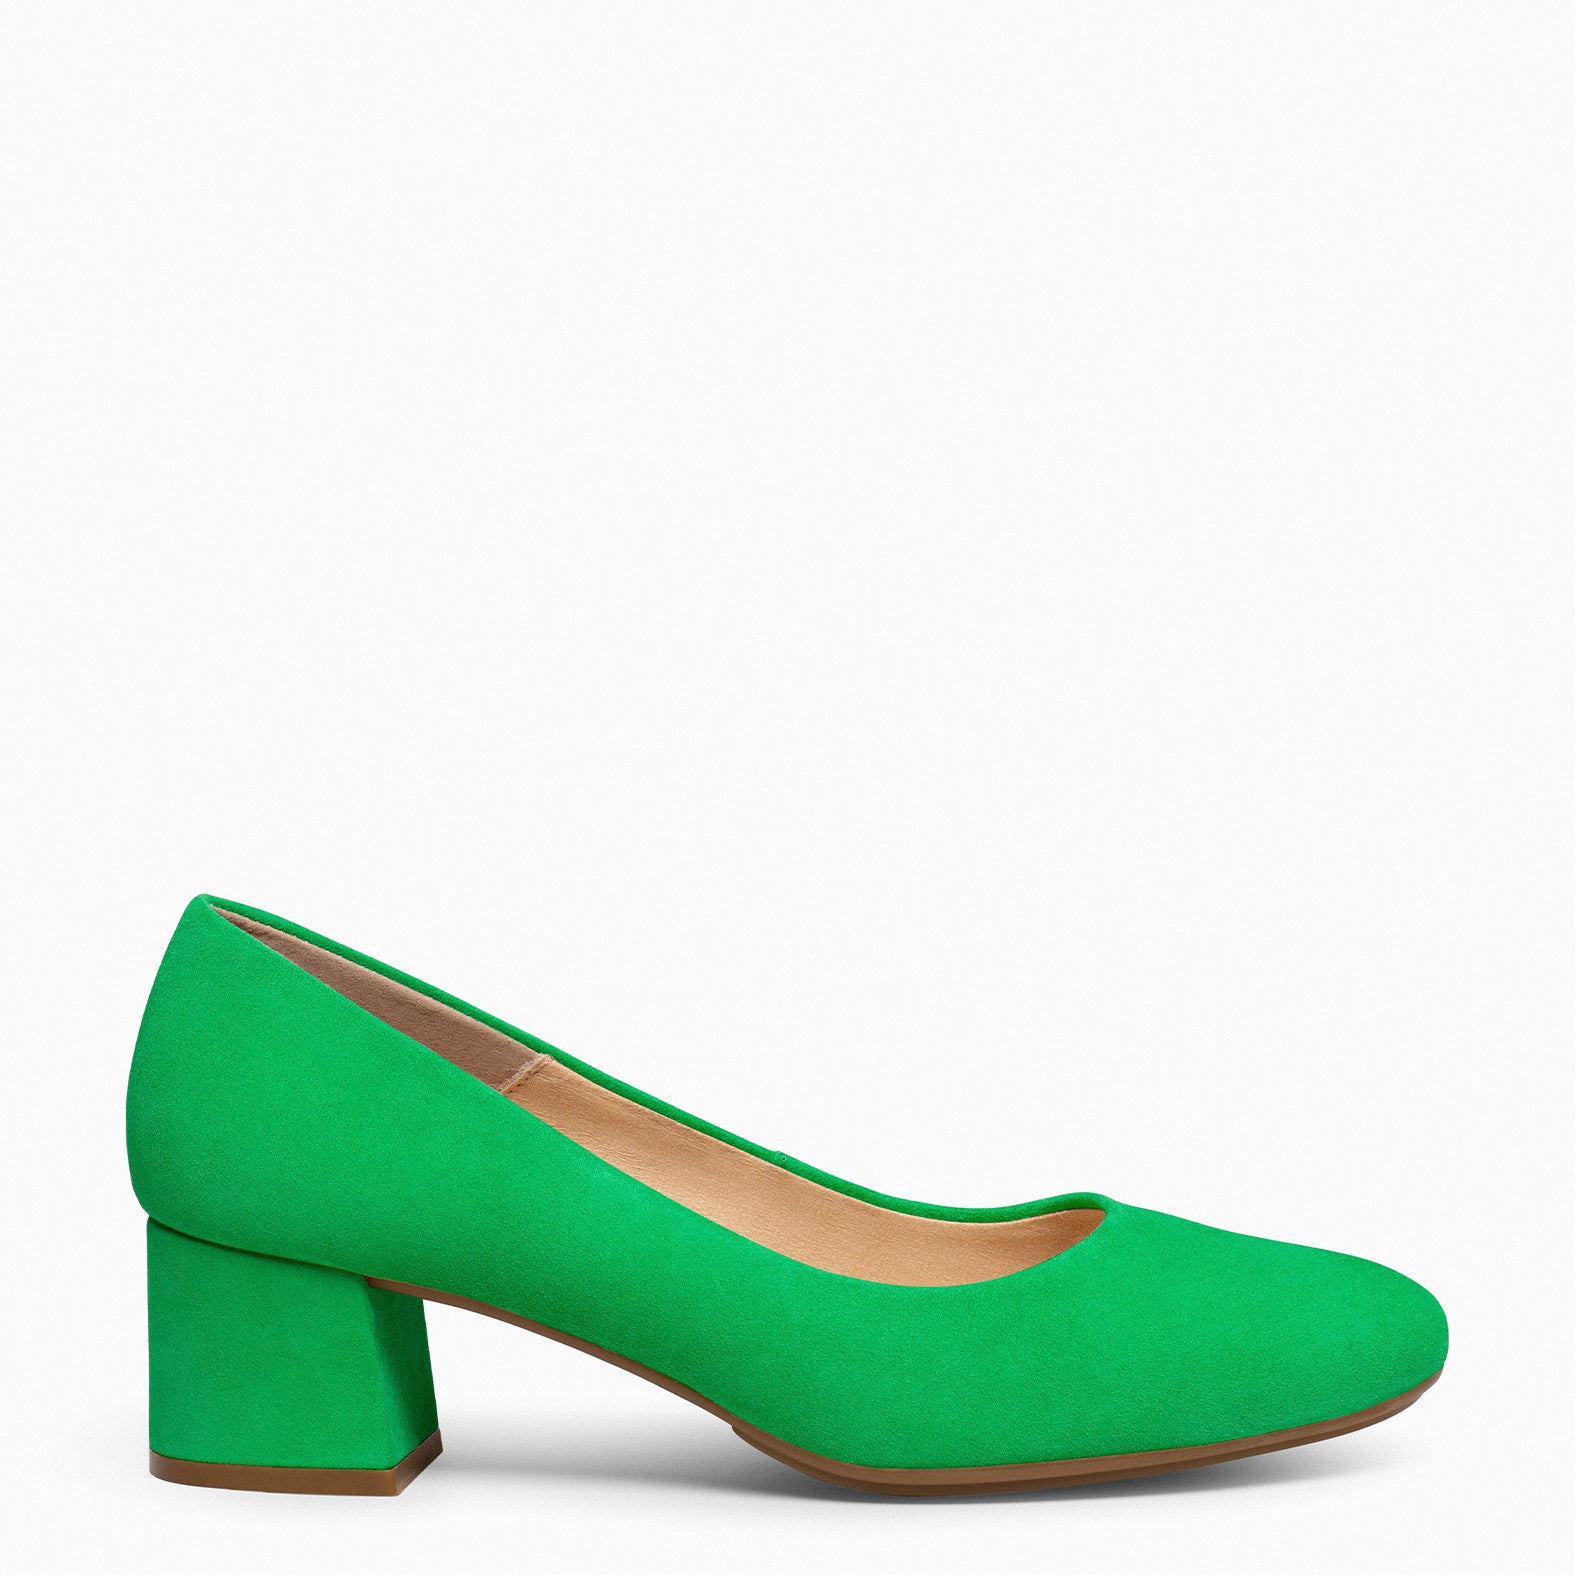 URBAN ROUND – GREEN suede leather low heels